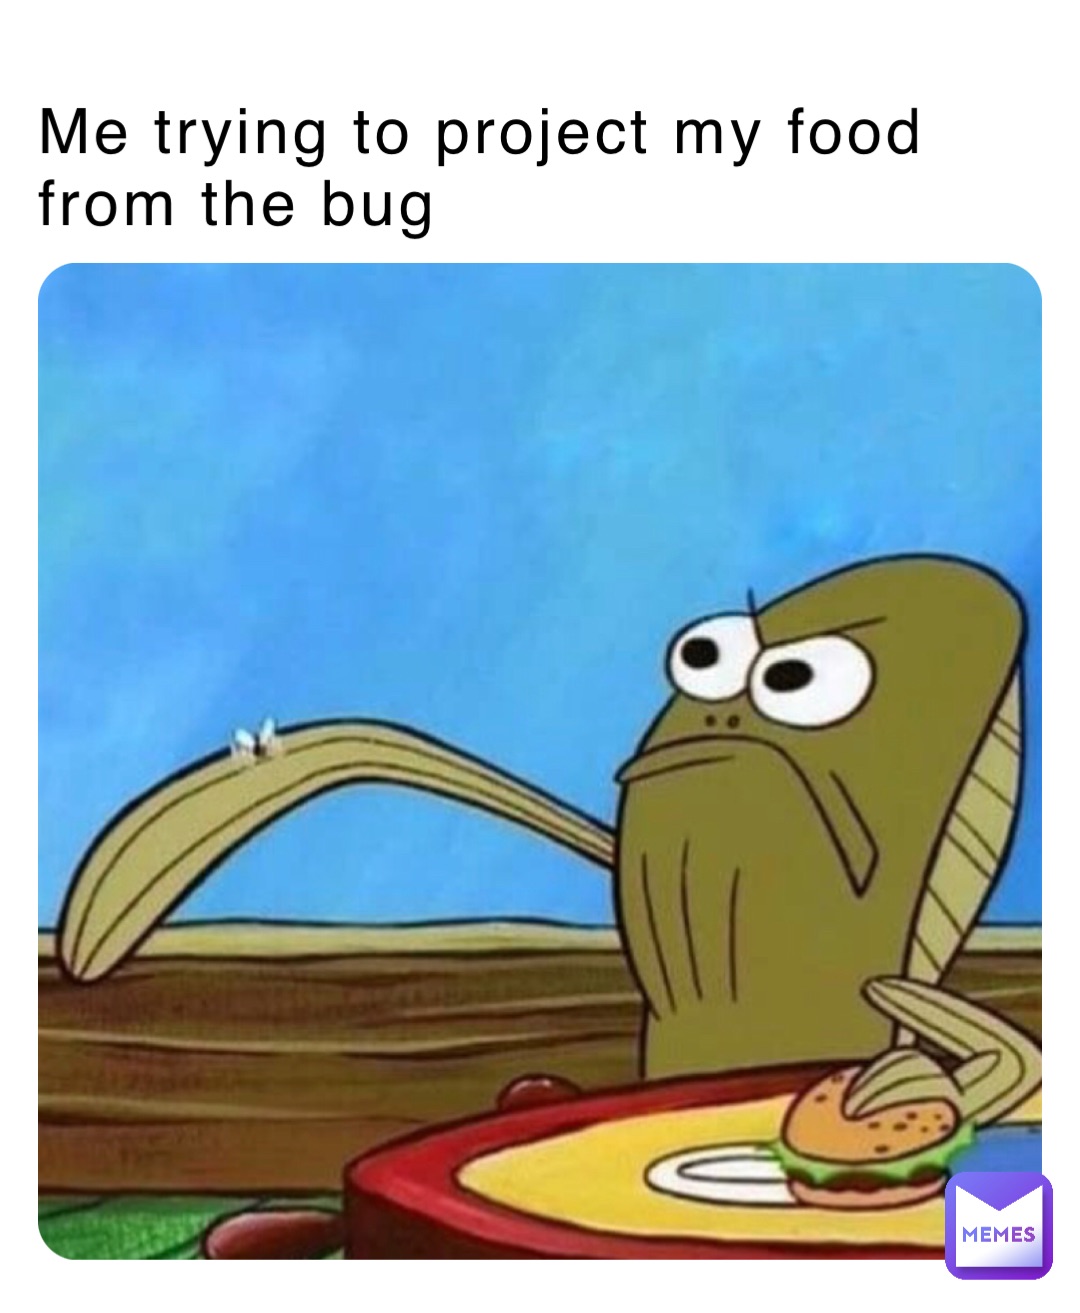 Me trying to project my food from the bug